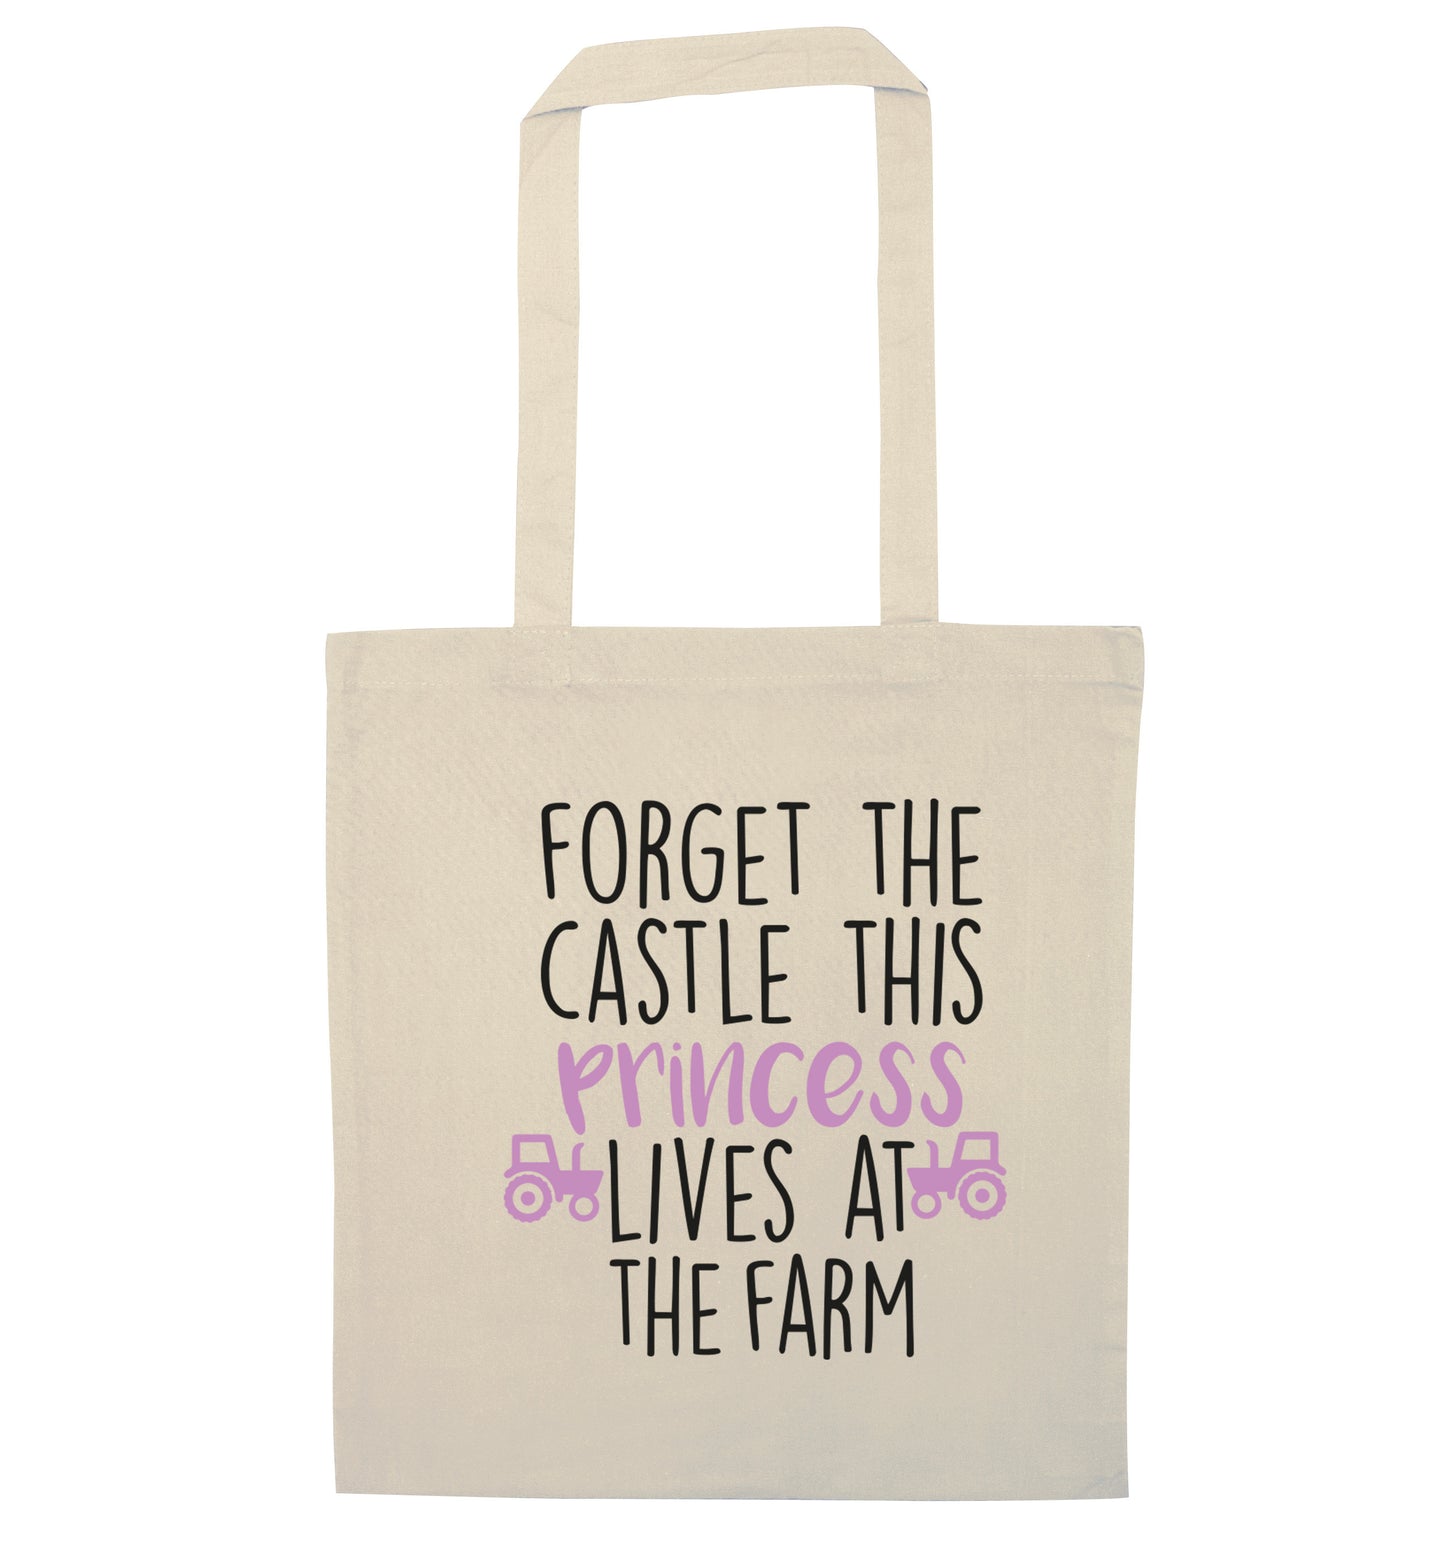 Forget the castle this princess lives at the farm natural tote bag